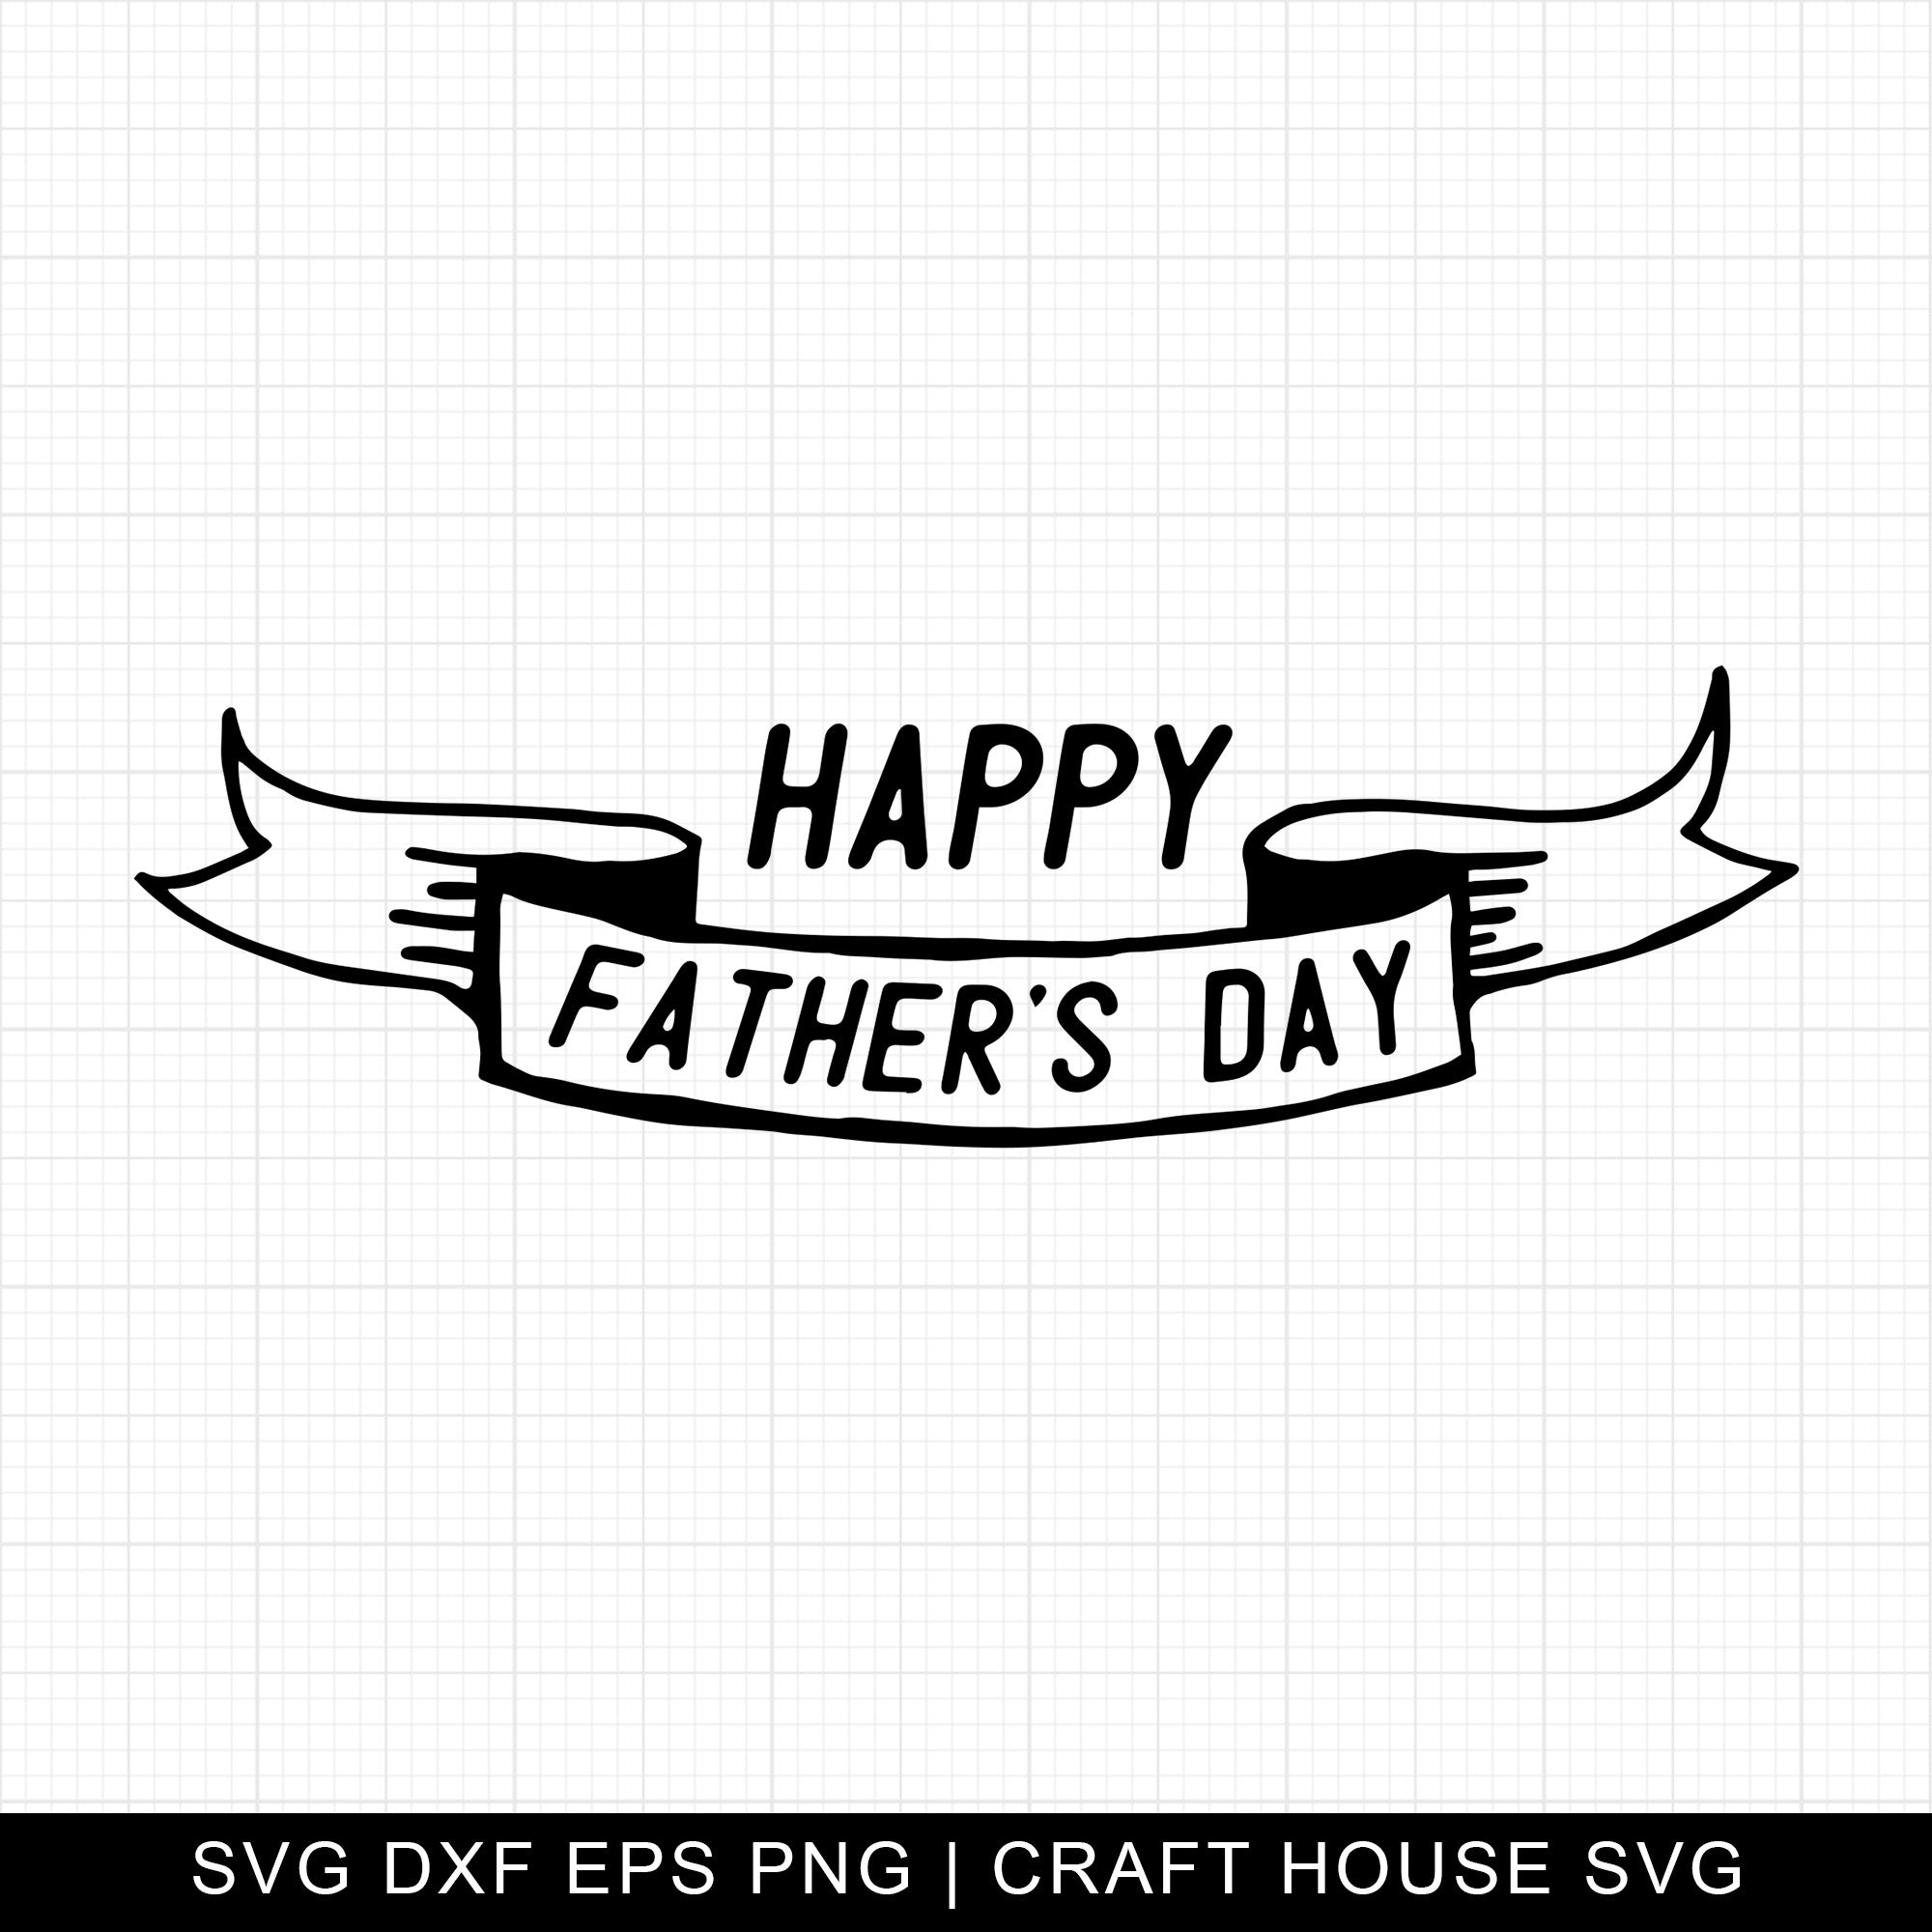 Happy Father's Day SVG | M8F7